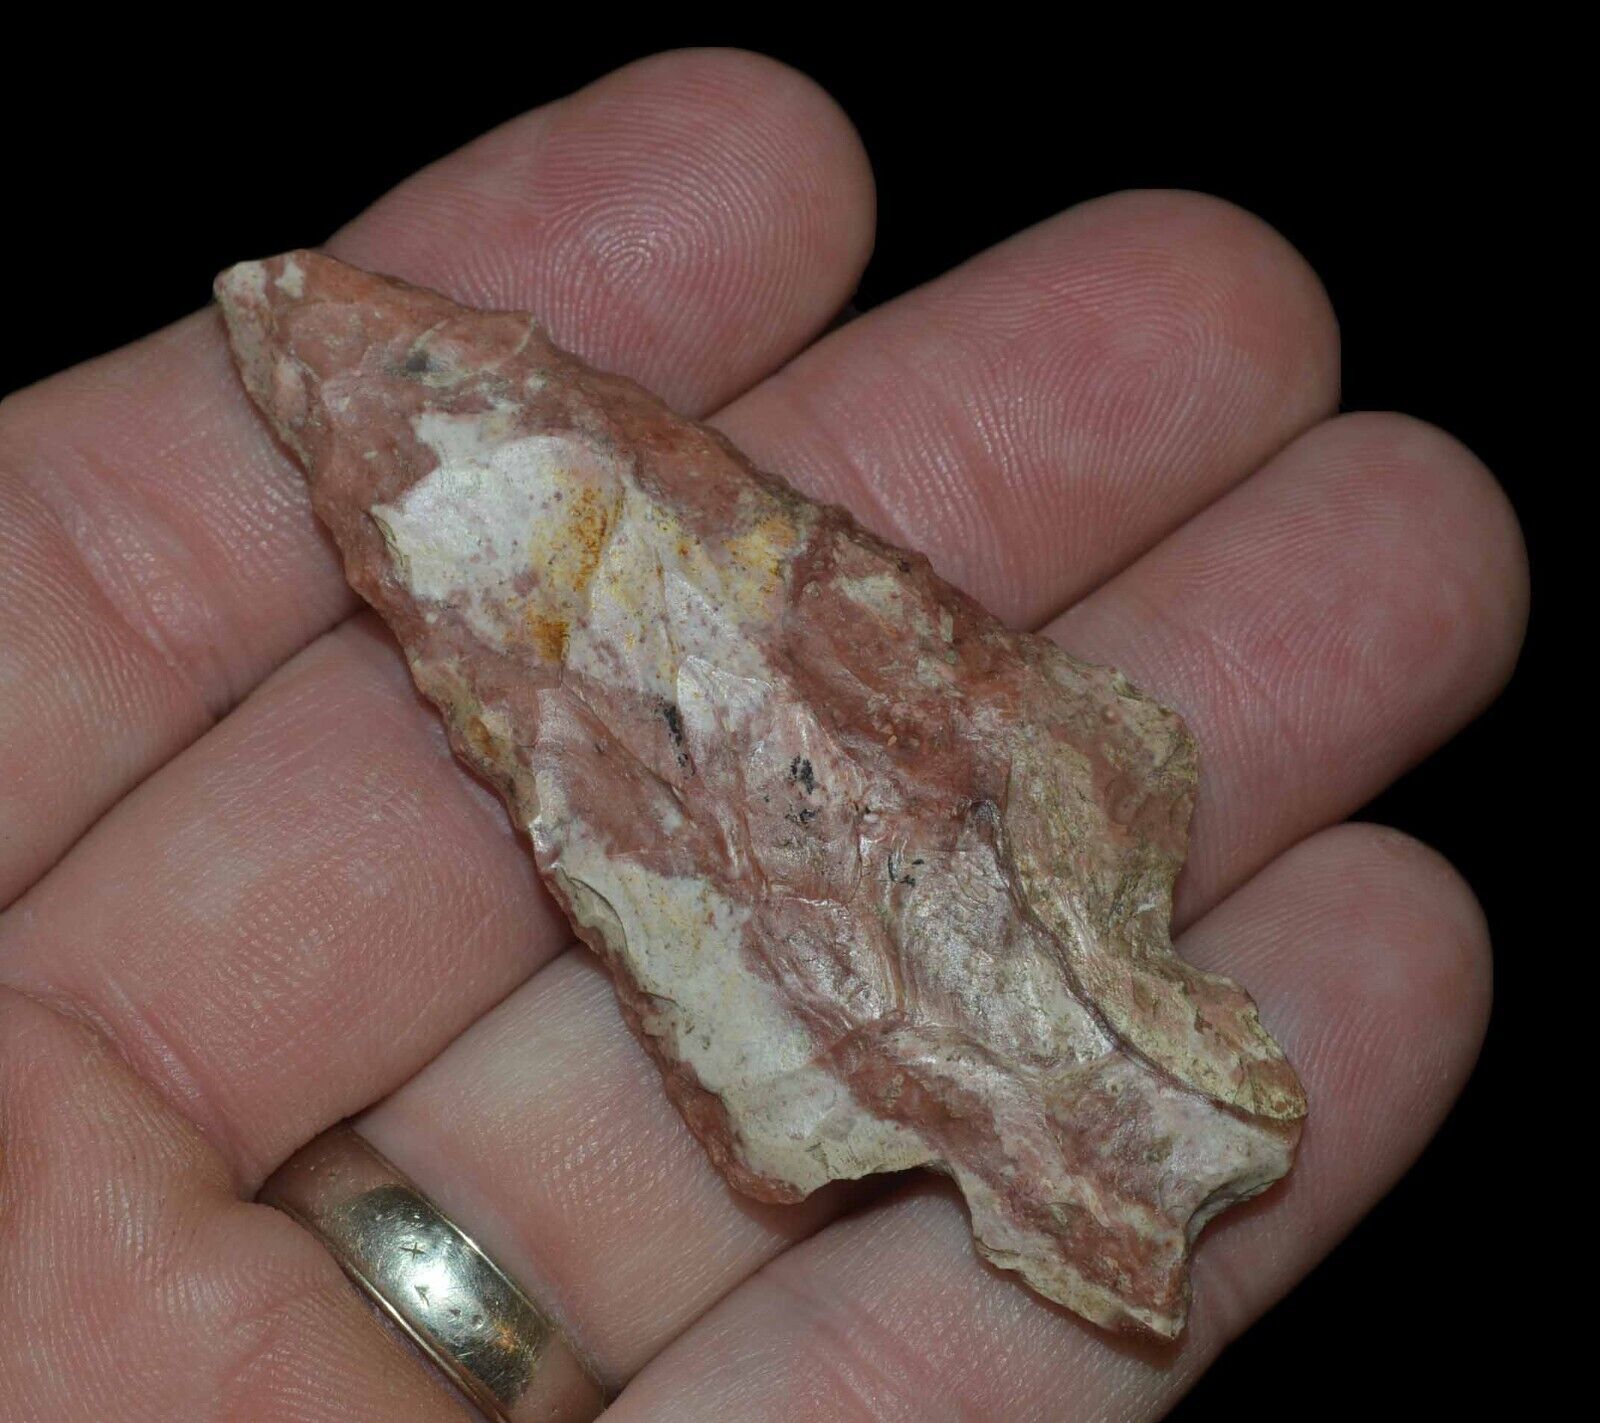 STEMMED POINT RANDOLPH CO MISSOURI INDIAN ARROWHEAD ARTIFACT COLLECTIBLE RELIC